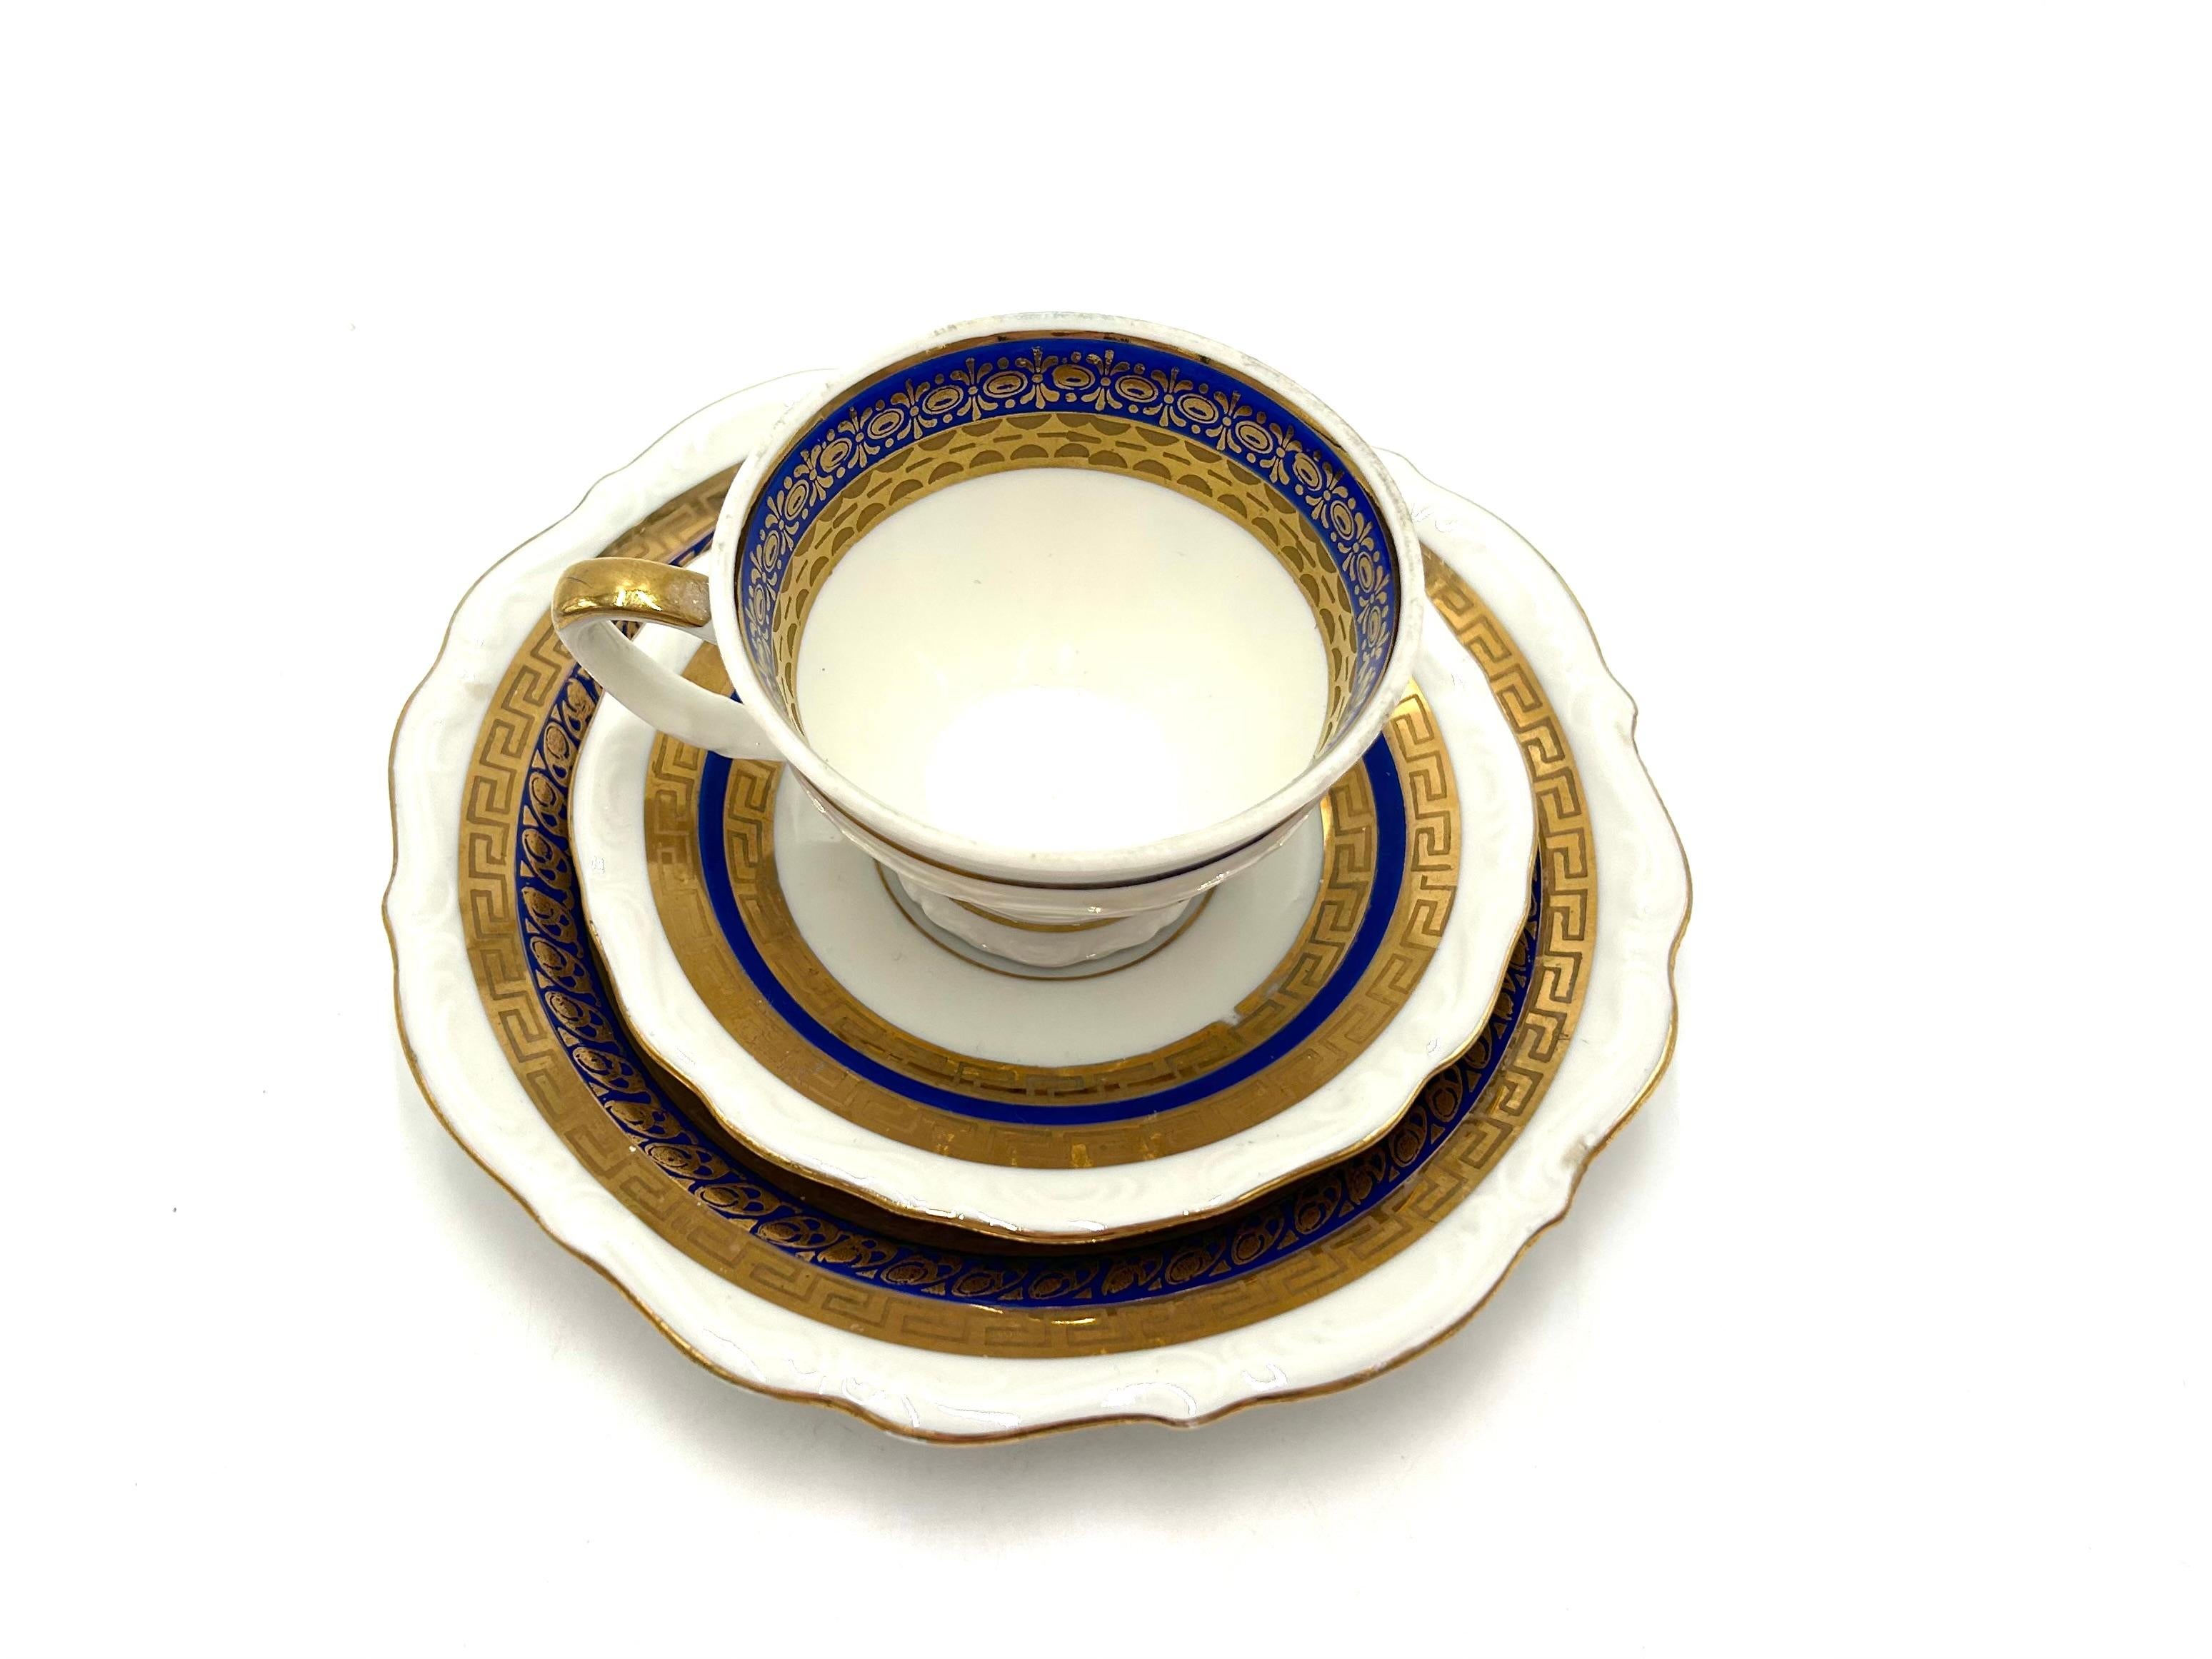 Porcelain trio - cup, saucer and plate

Decorated in gold and cobalt colors.

Produced by Bogucice in Poland in the 1960s.

cup: height 7.5 cm, diameter 4.5 cm.